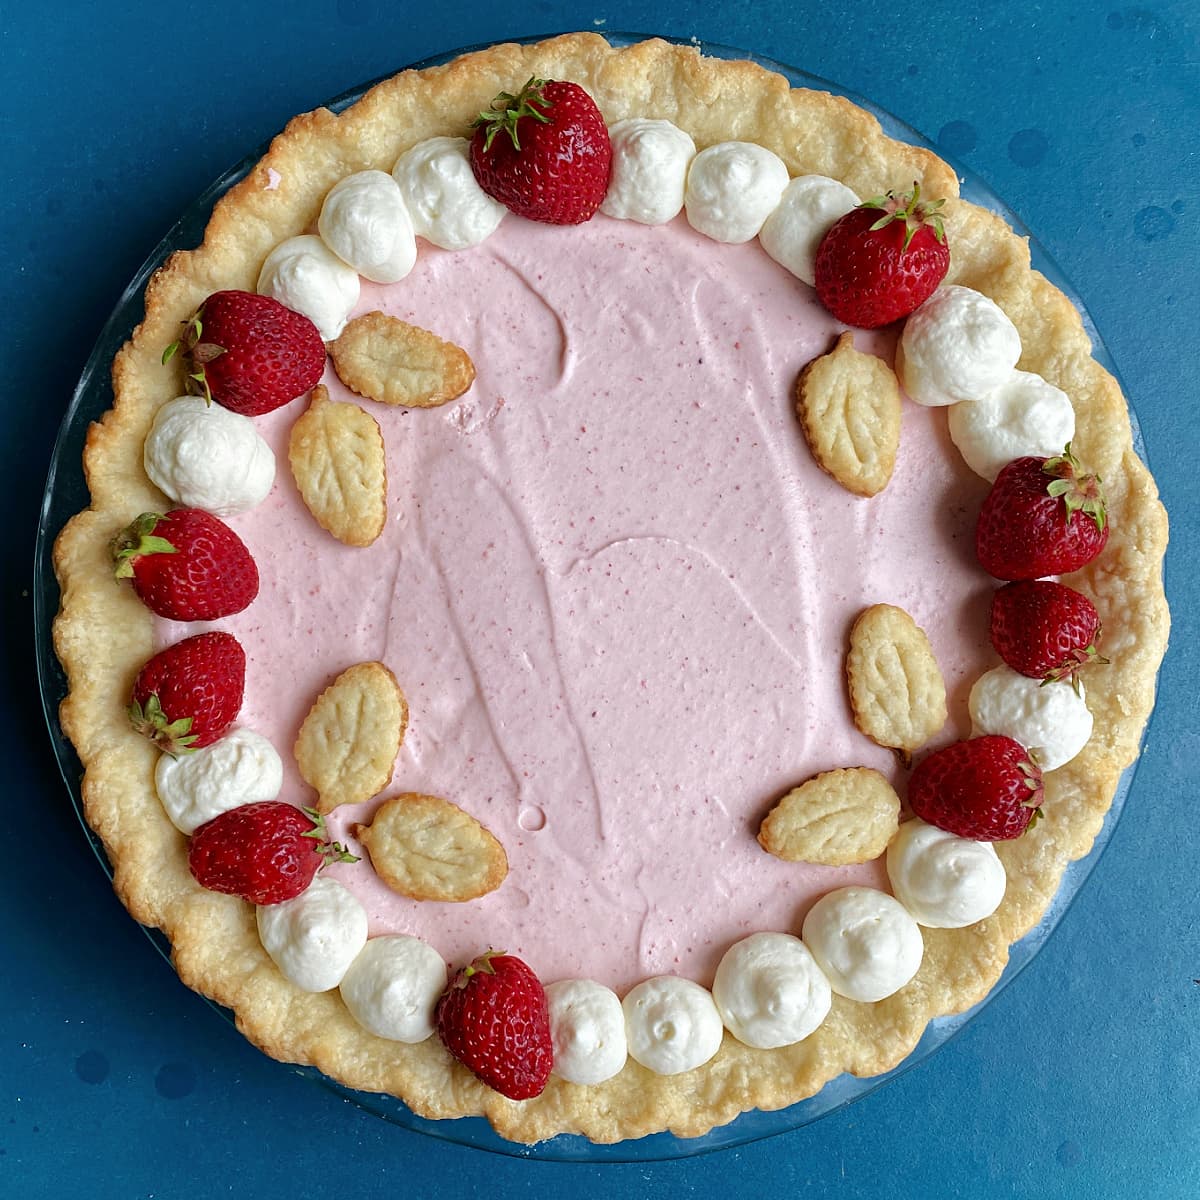 Fresh Strawberry Cream Pie, decorated with fresh Strawberries and pastry leaves.